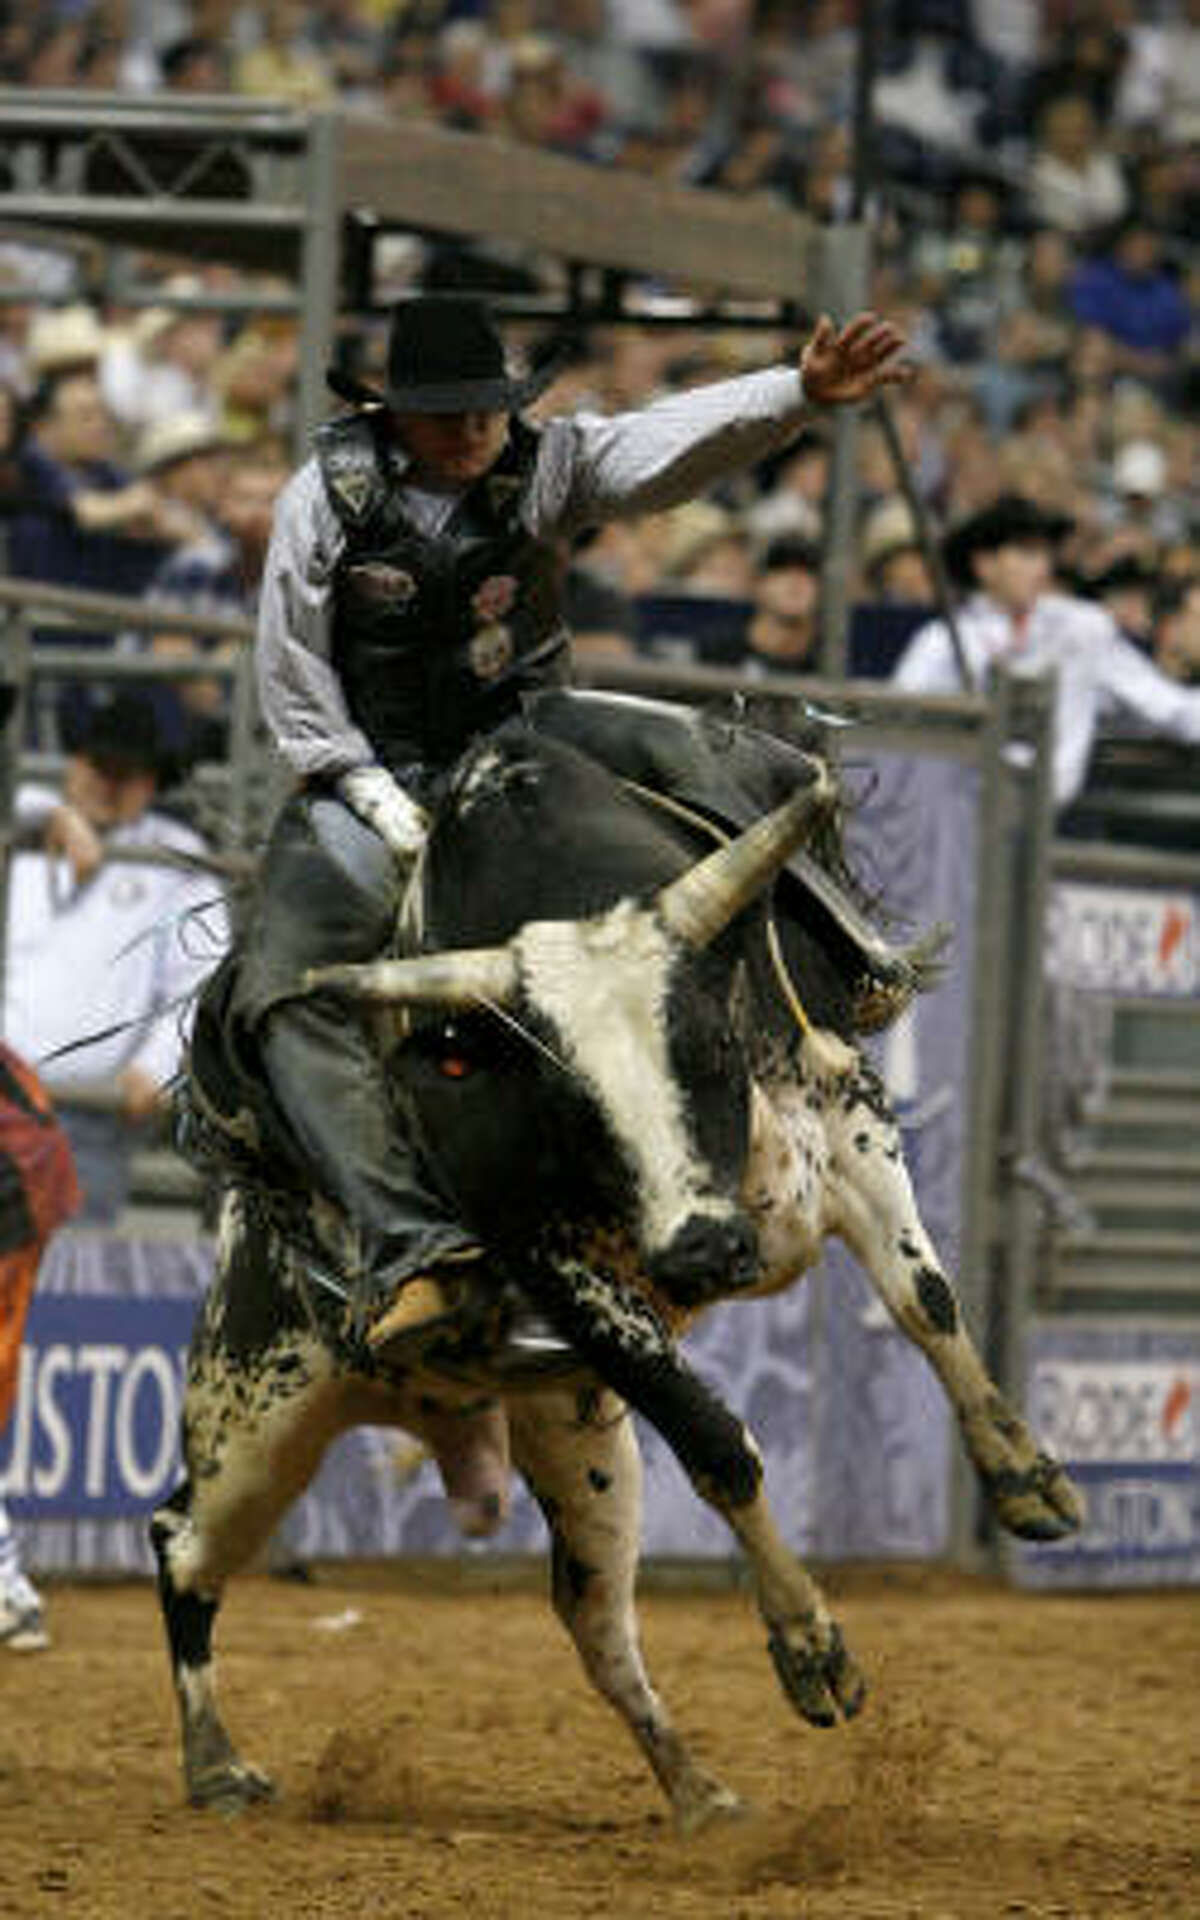 Howdy Cloud rode his bull, “Smooth Criminal,” long enough to earn $7,000.